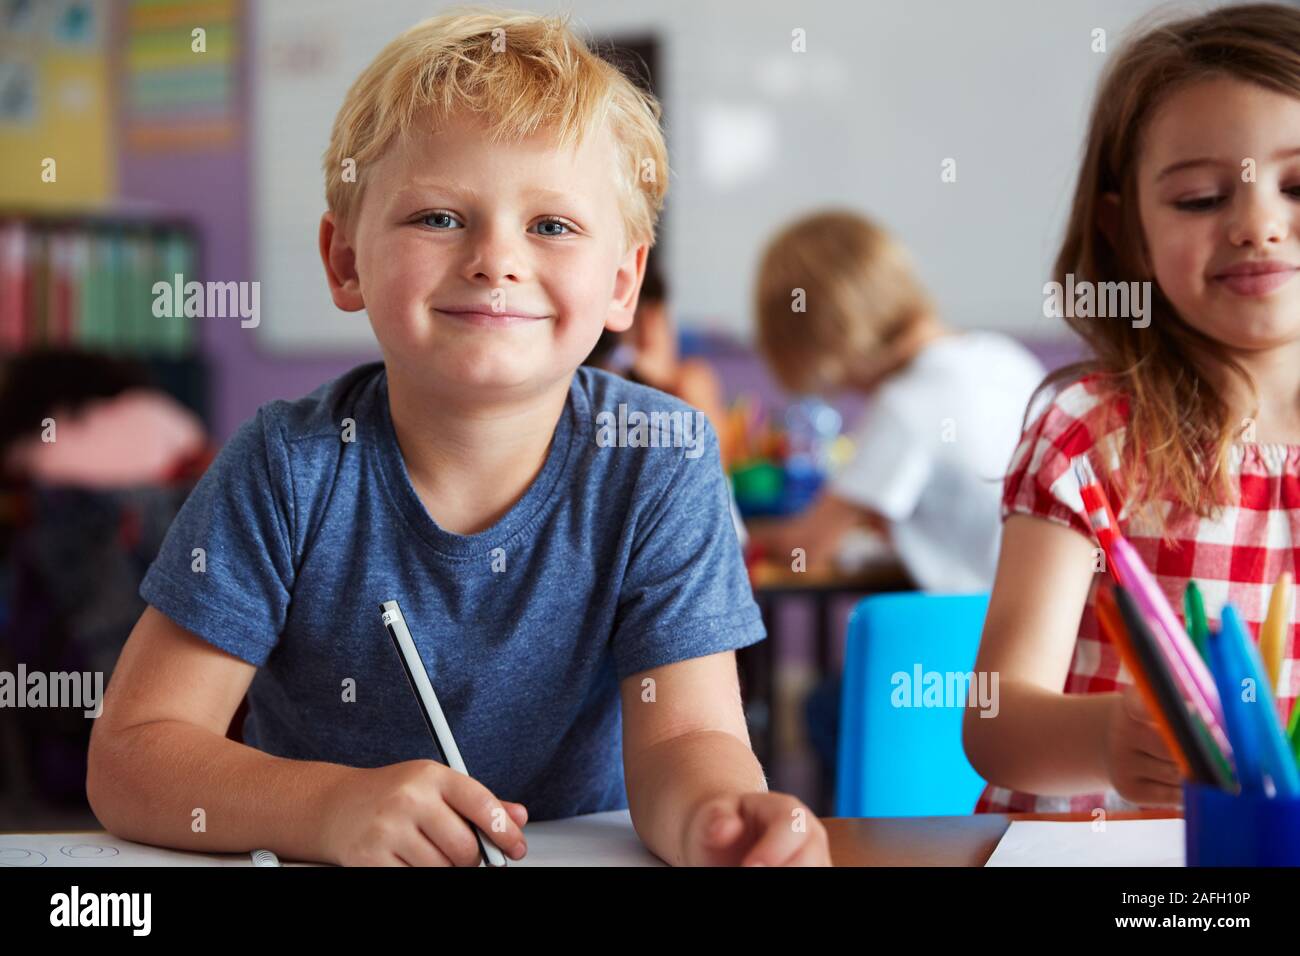 Portrait Of Male And Female Elementary School Pupils Working At Desk Stock Photo